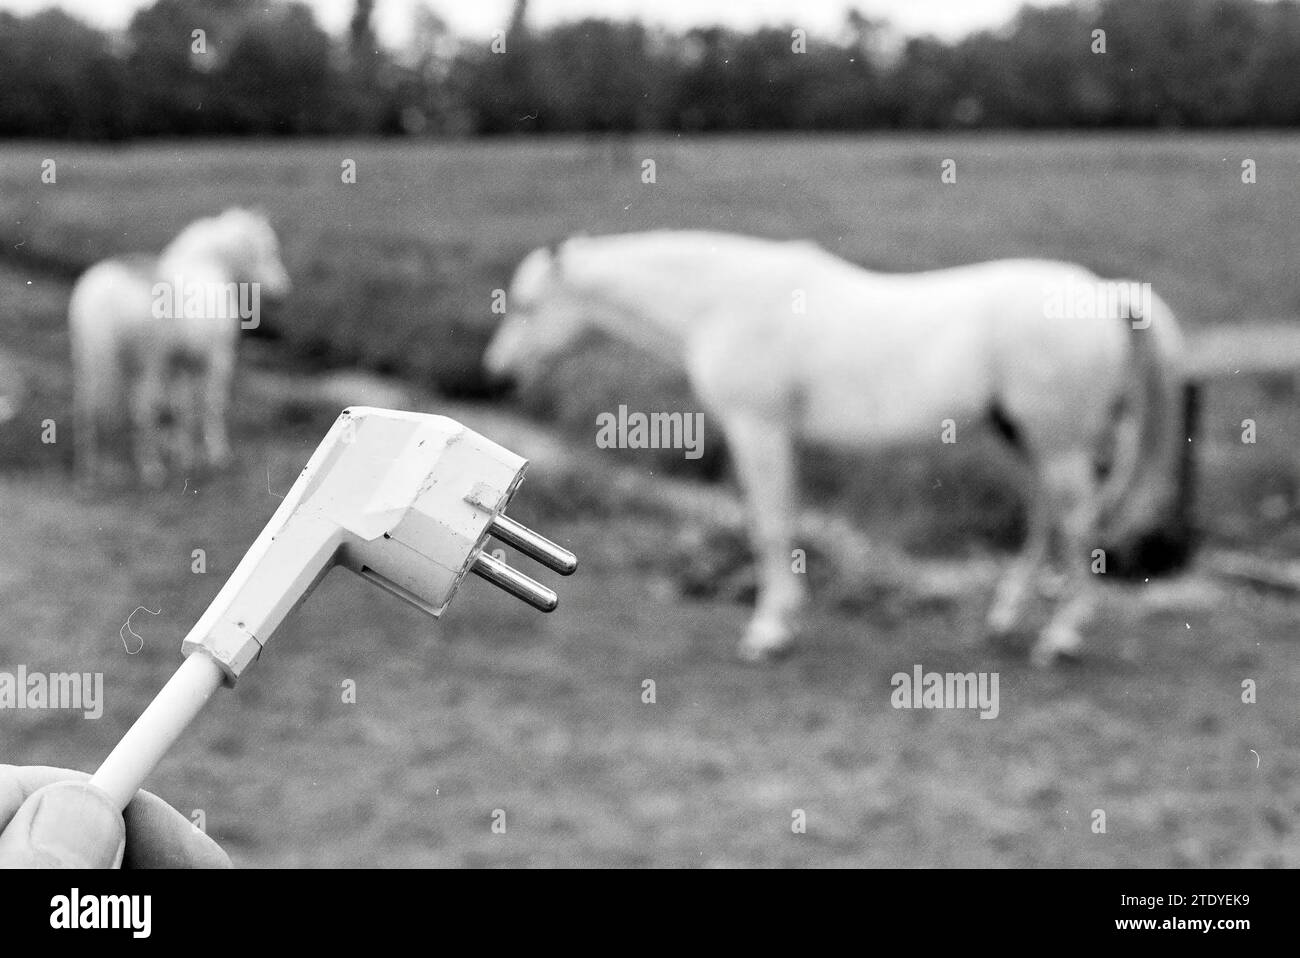 Electrocute horses, 17-05-1993, Whizgle News from the Past, Tailored for the Future. Explore historical narratives, Dutch The Netherlands agency image with a modern perspective, bridging the gap between yesterday's events and tomorrow's insights. A timeless journey shaping the stories that shape our future. Stock Photo